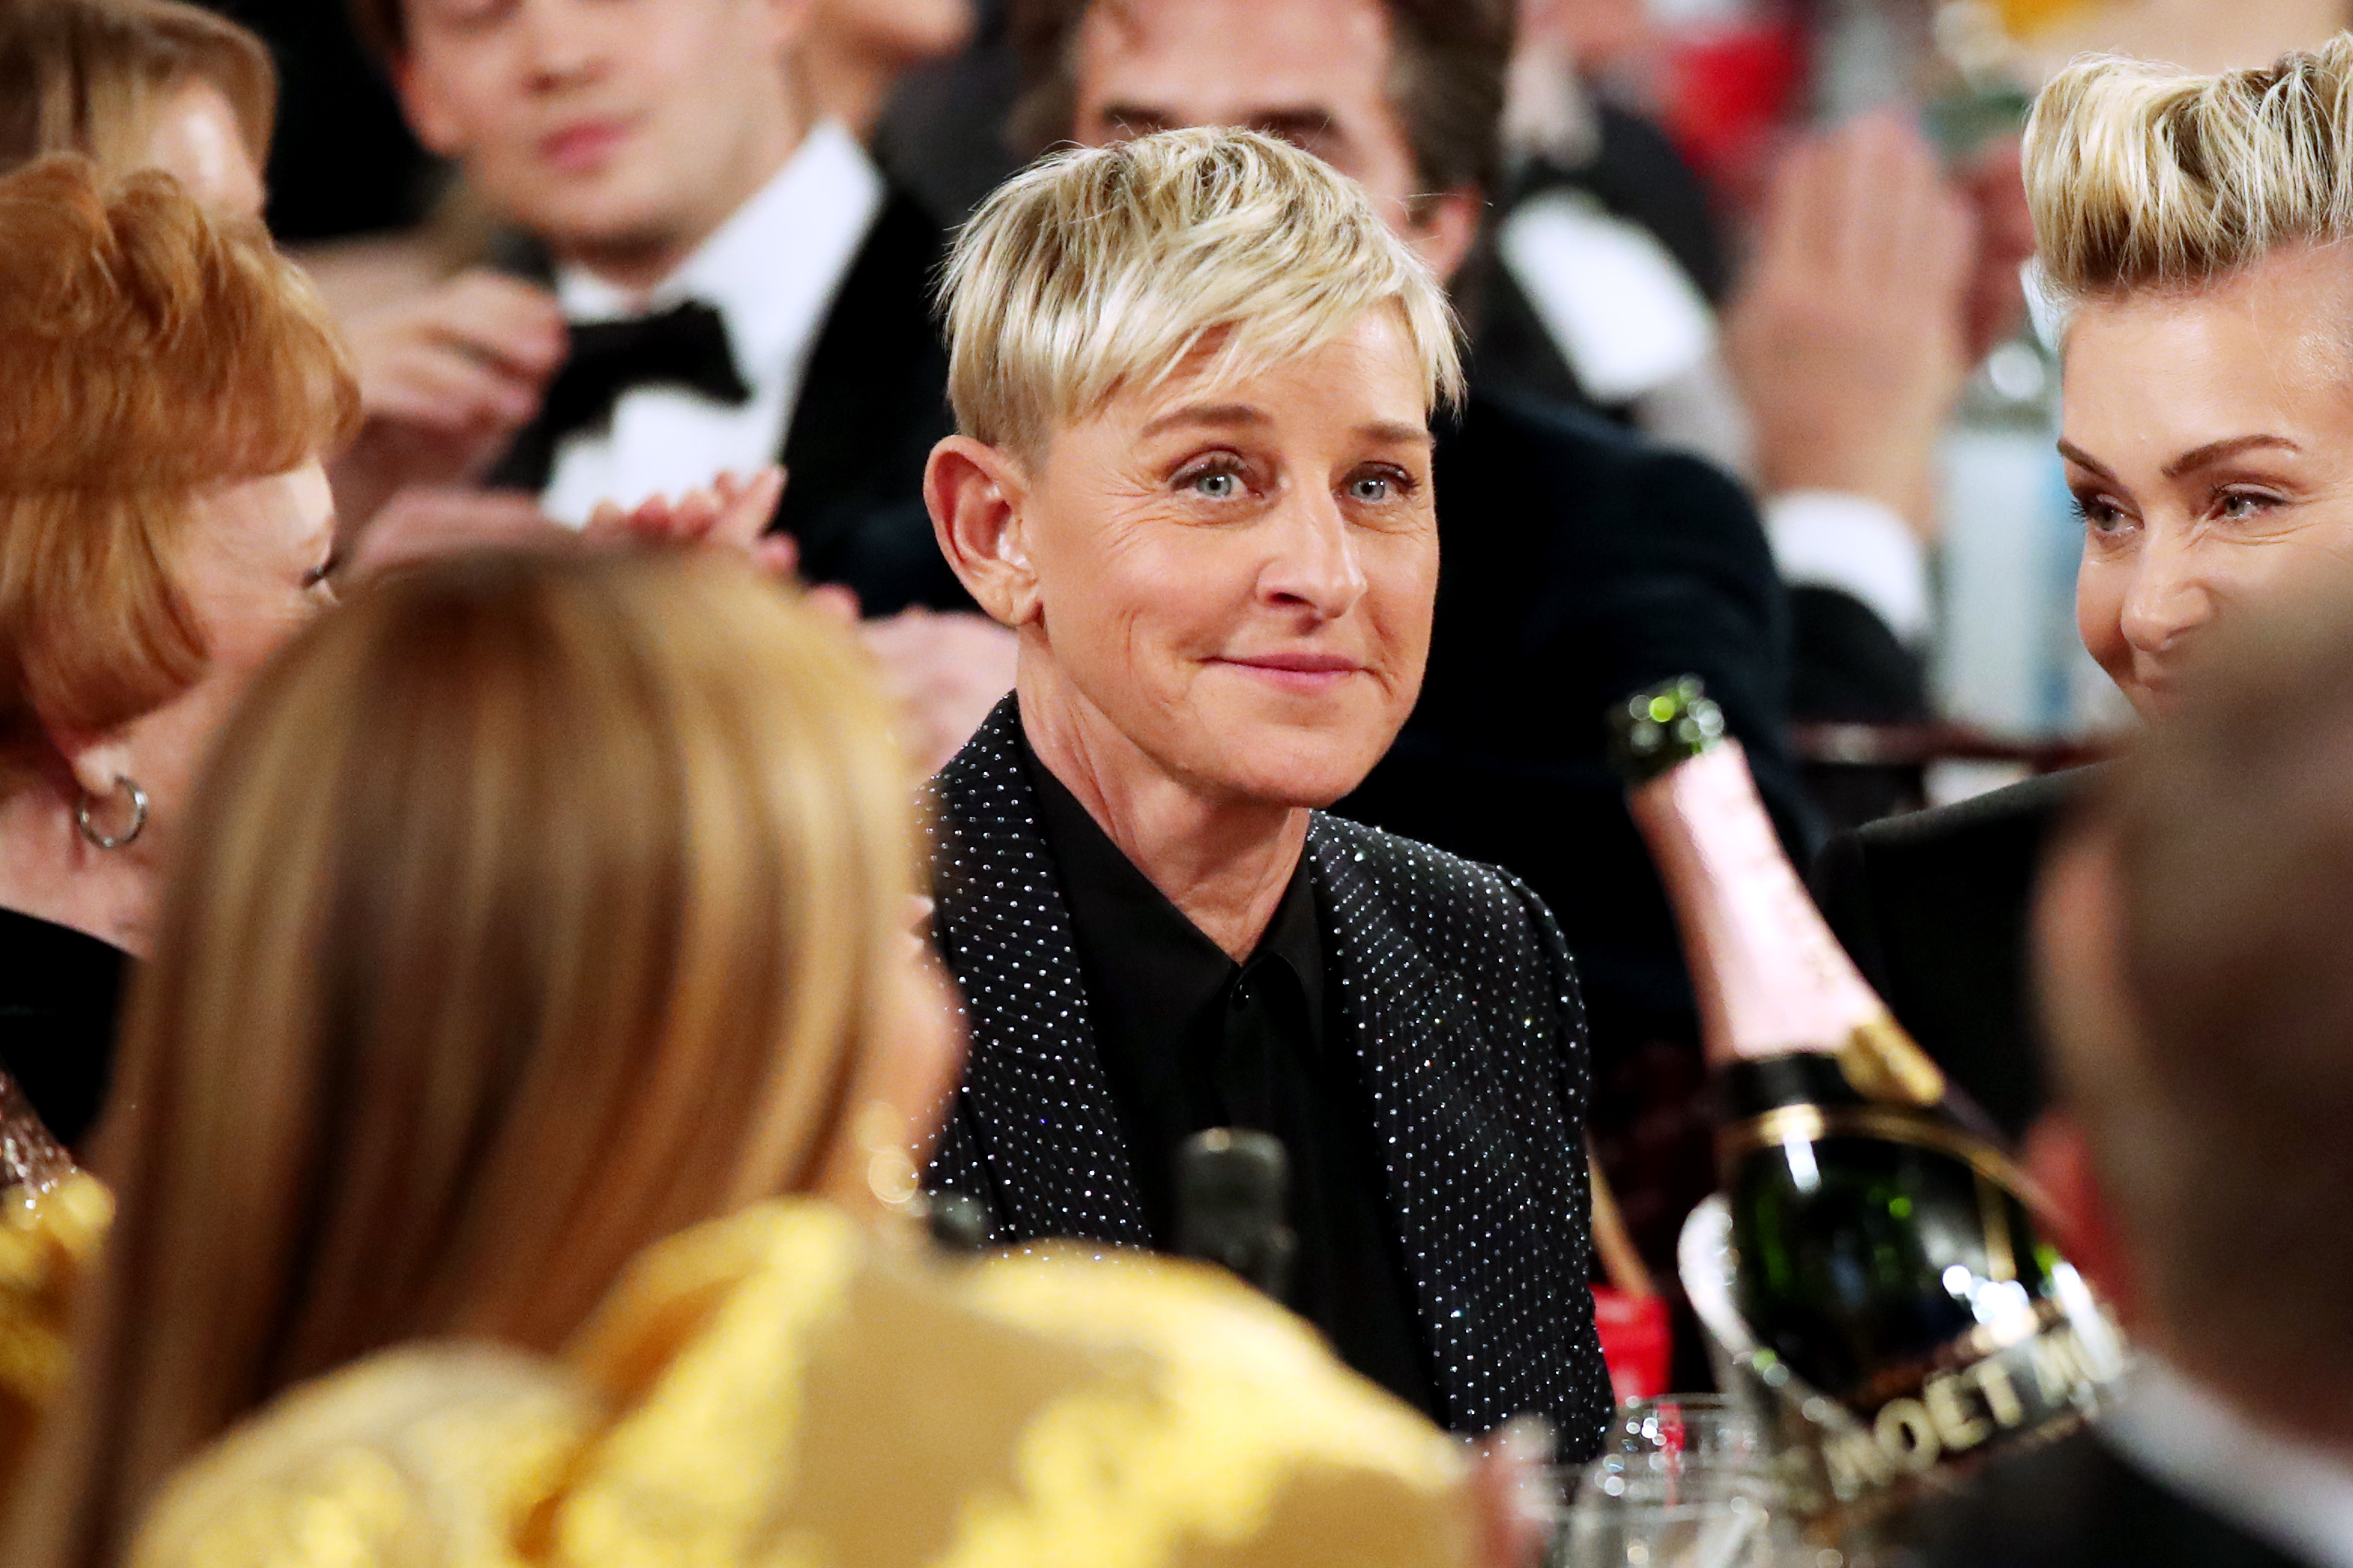 Ellen DeGeneres in a dotted suit at an event, surrounded by guests